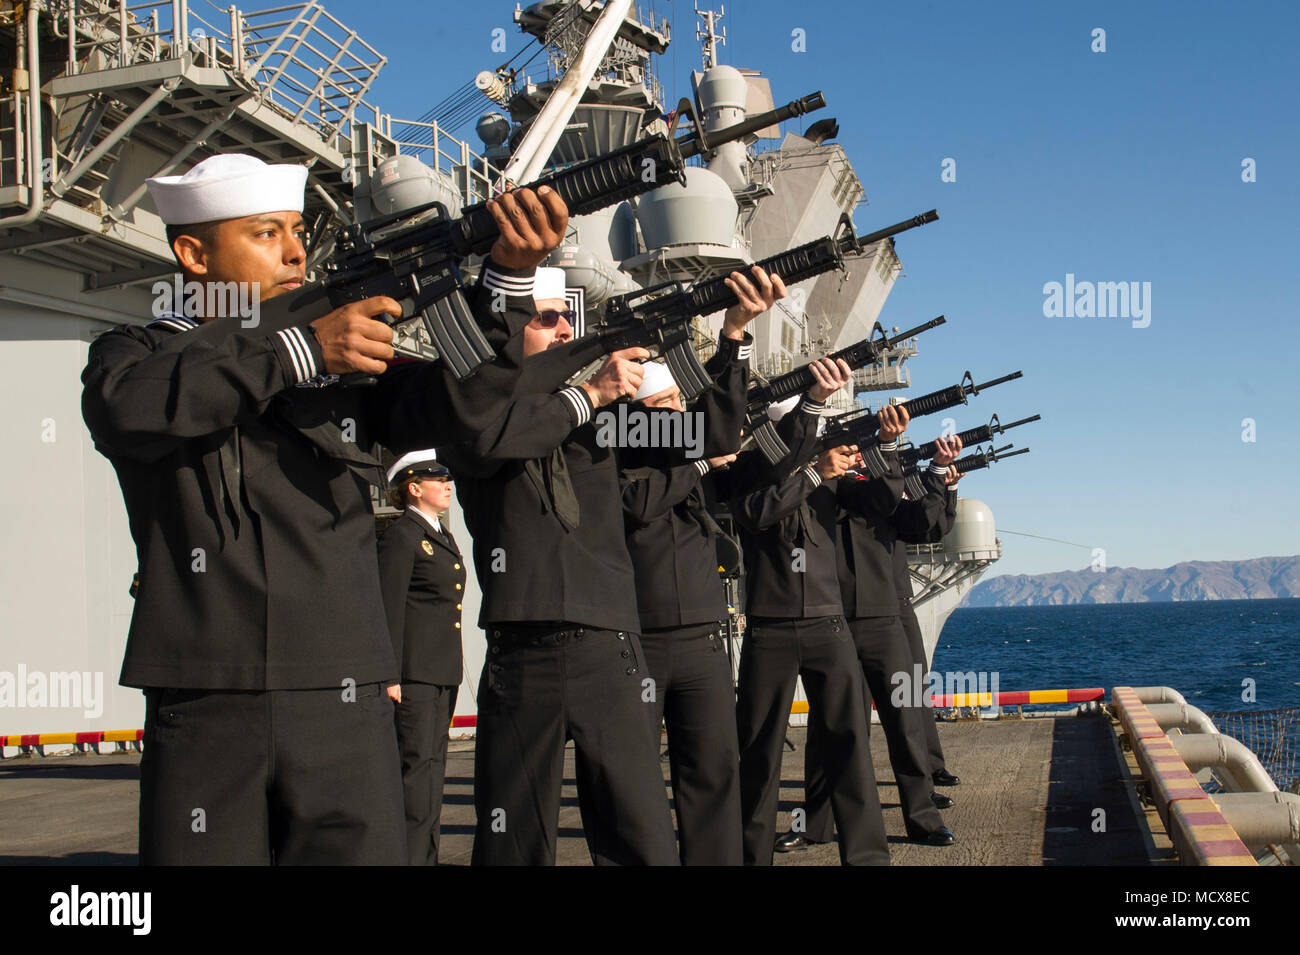 180304-N-ZS023-066  PACIFIC OCEAN (March 4, 2018) Sailors assigned to the amphibious assault ship USS America (LHA 6) perform a ceremonial gun salute during a burial-at-sea ceremony on the ship’s starboard elevator. America is underway off the coast of southern California preparing for an ammunitions offload prior to entering a planned maintenance availability period. (U.S. Navy photo by Mass Communication Specialist 3rd Class Vance Hand/Released) Stock Photo